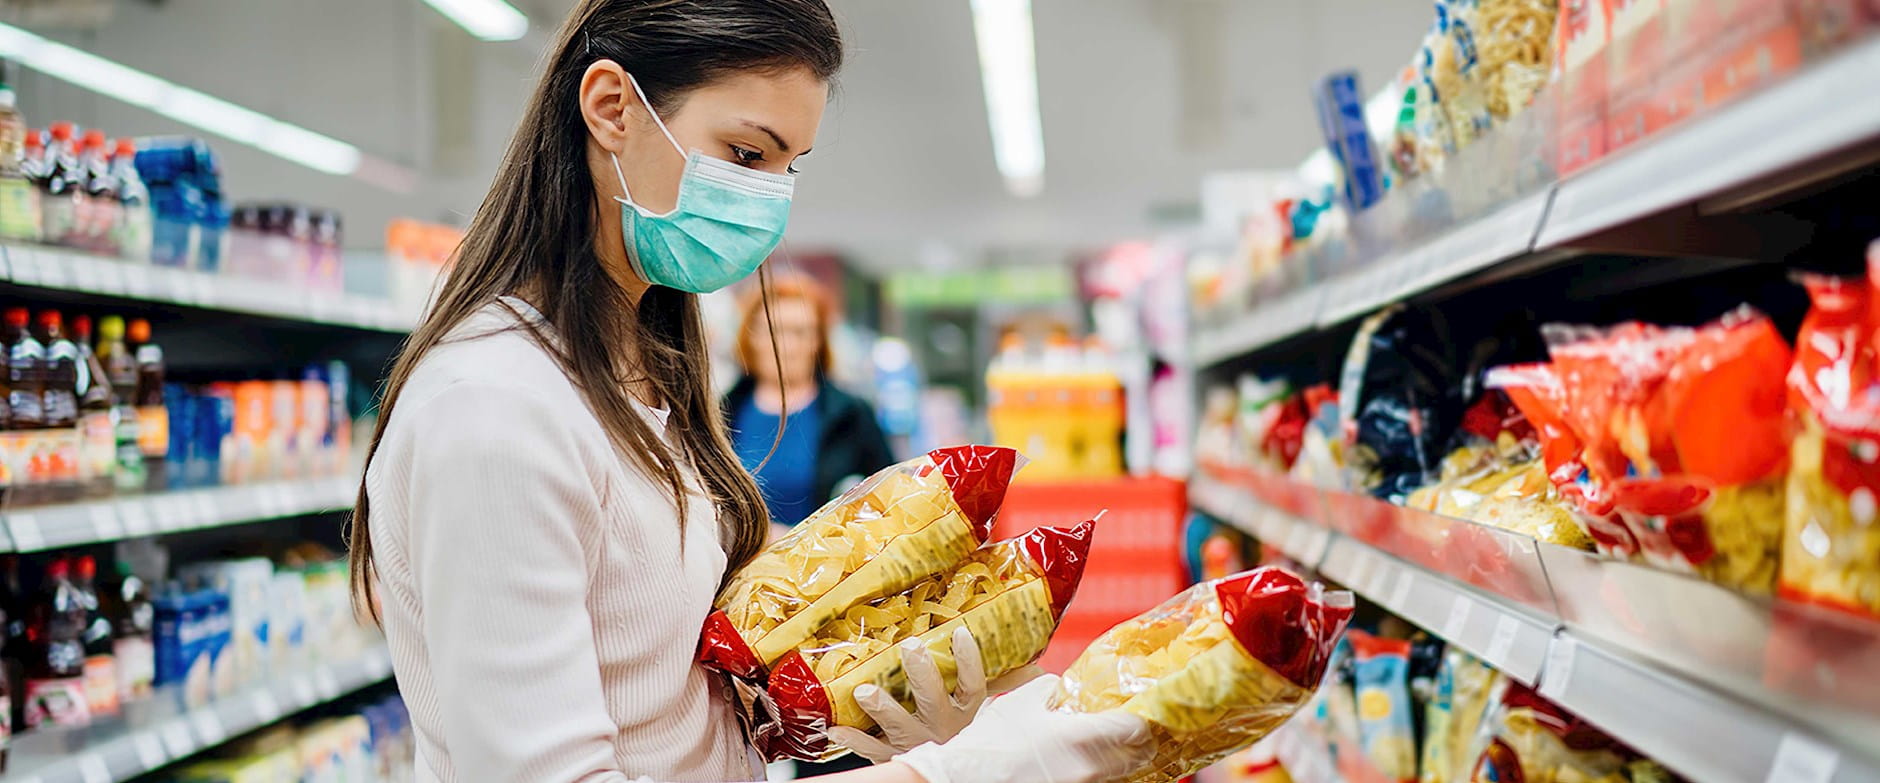 Woman wearing a mask shopping at a grocery store